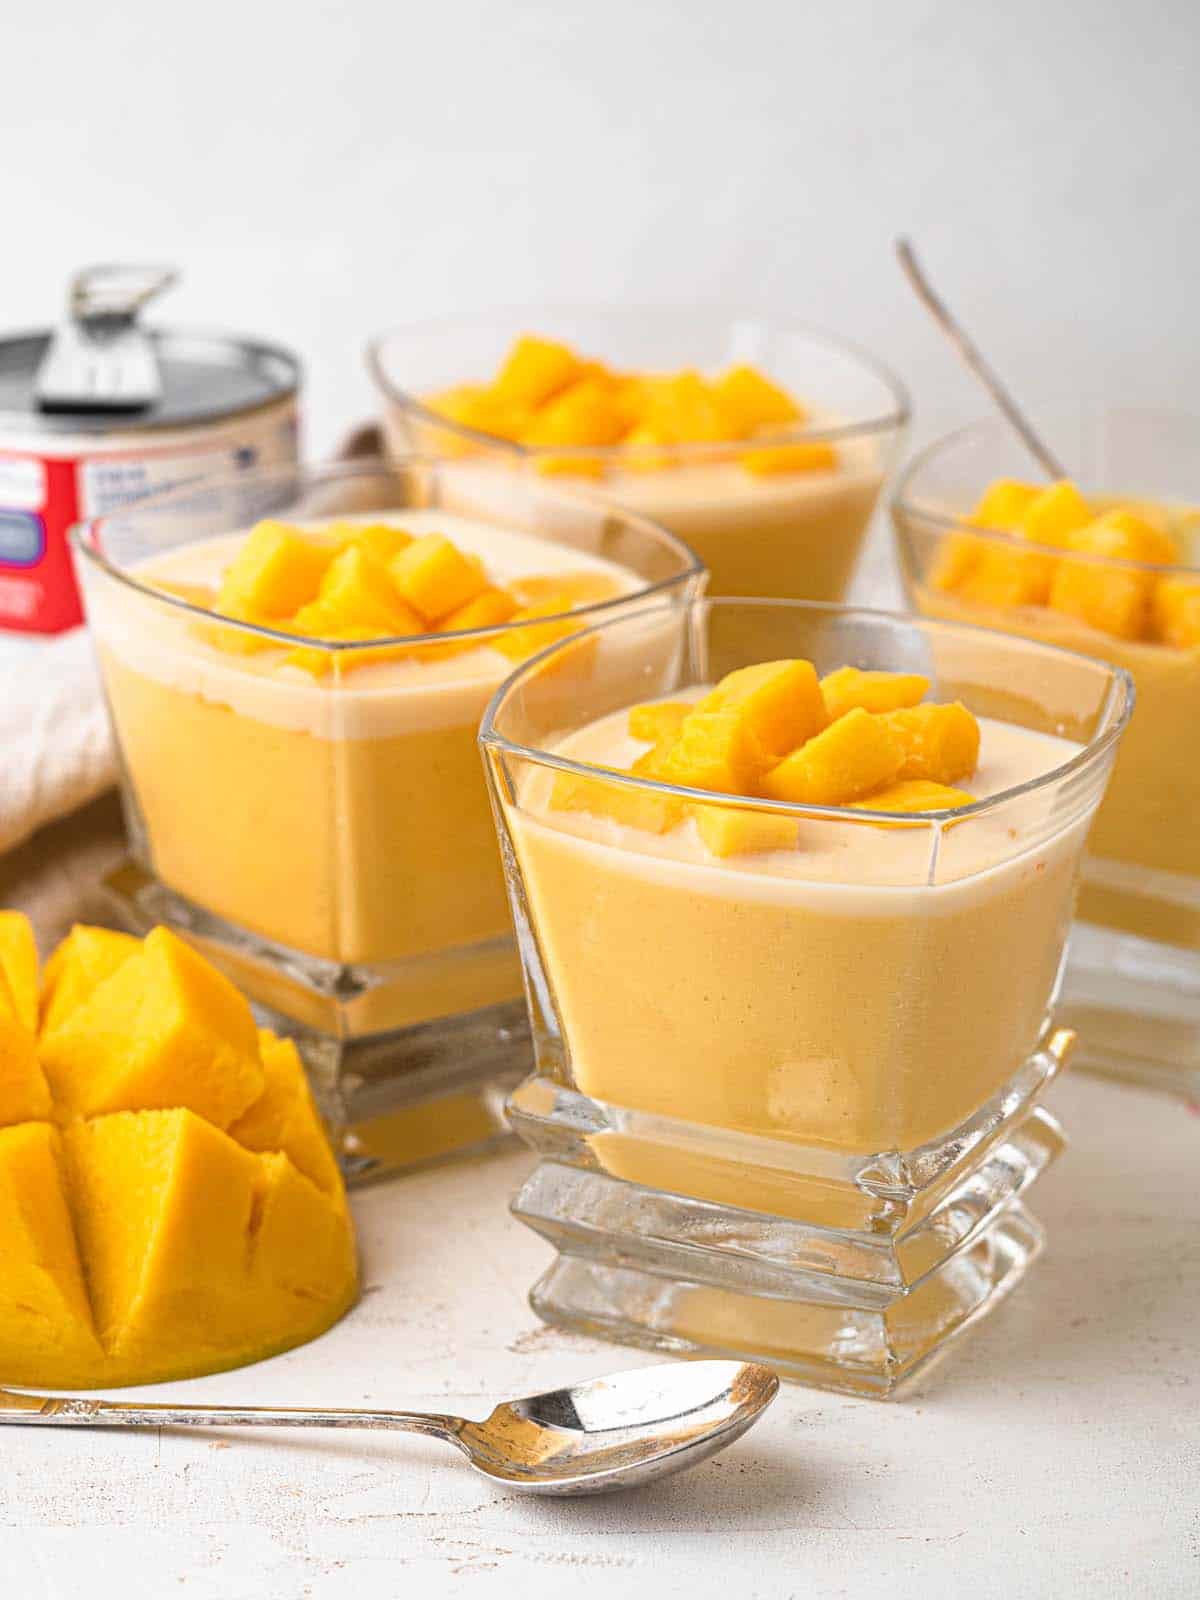 chinese yum cha mango pudding topped with evaporated milk